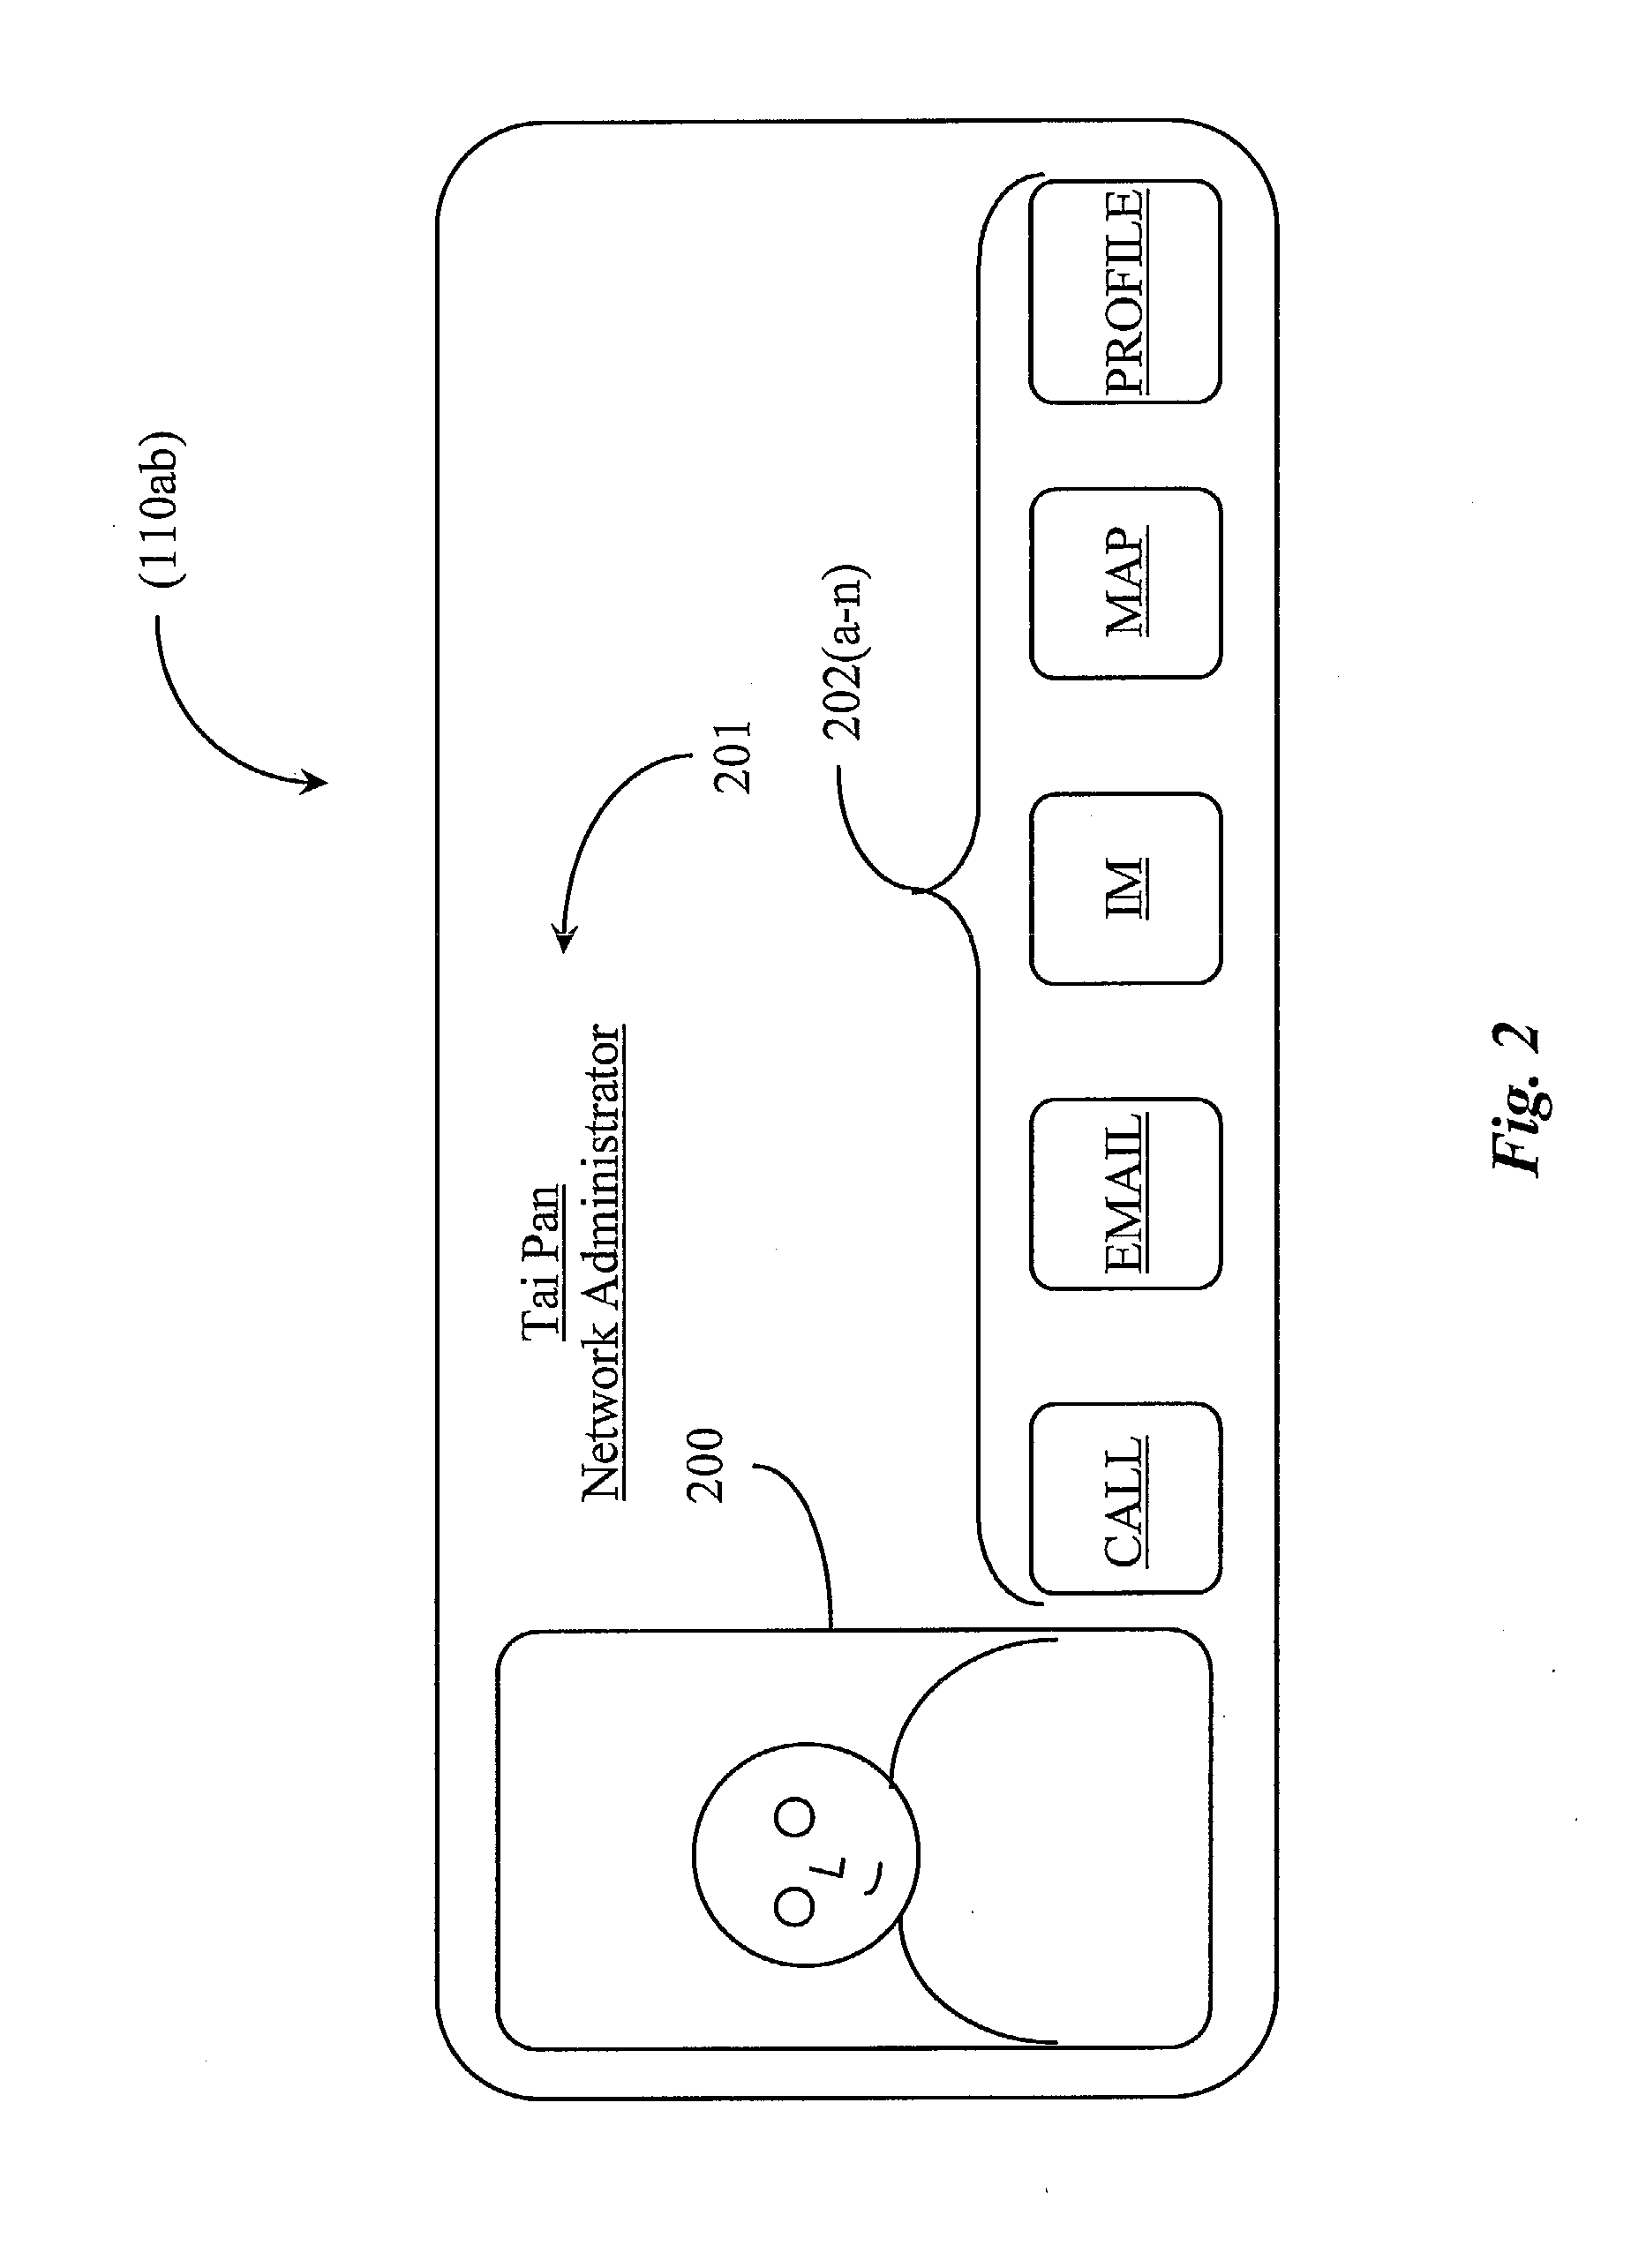 Server-Client Interaction and Information Management System